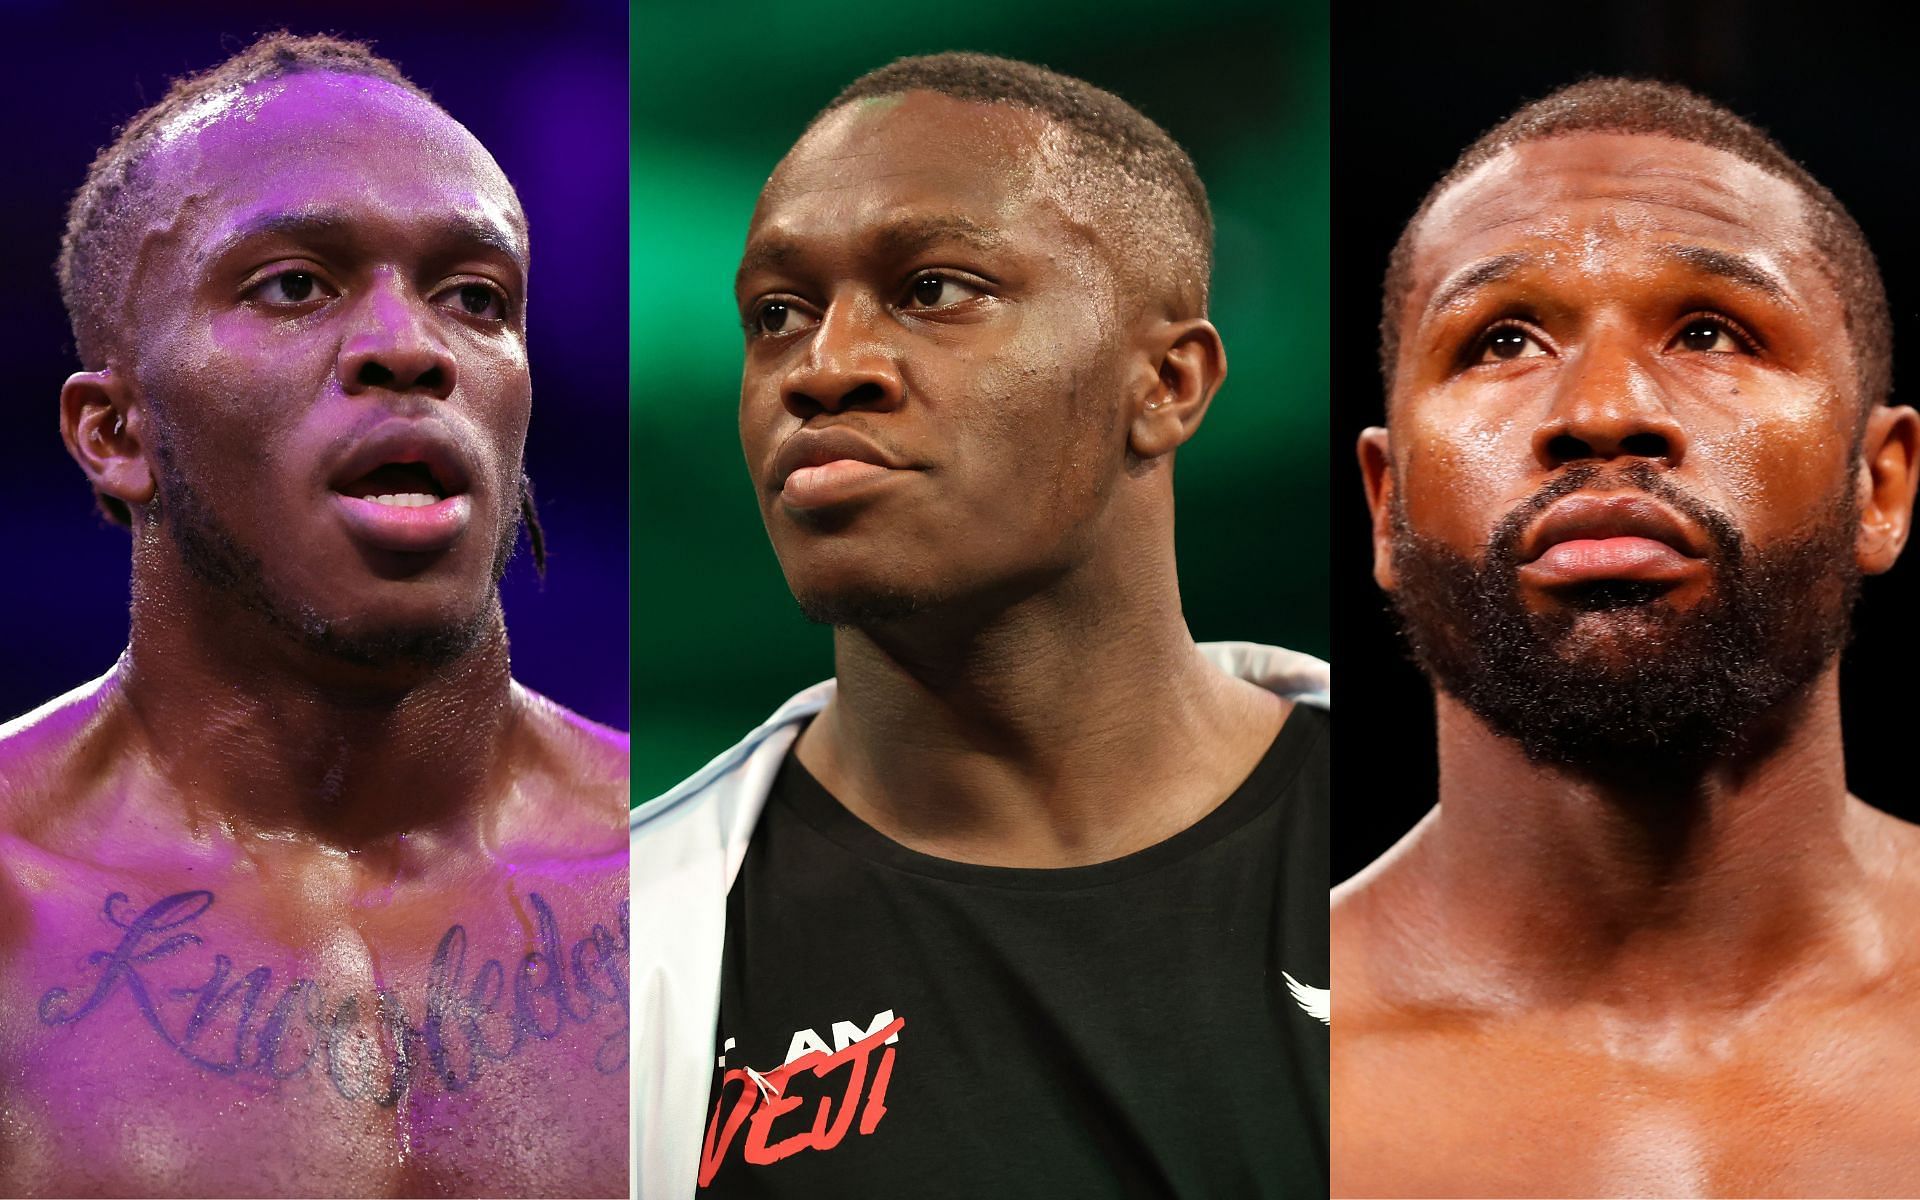 KSI (left), Deji (center), and Floyd Mayweather (right) (Image credits Getty Images)